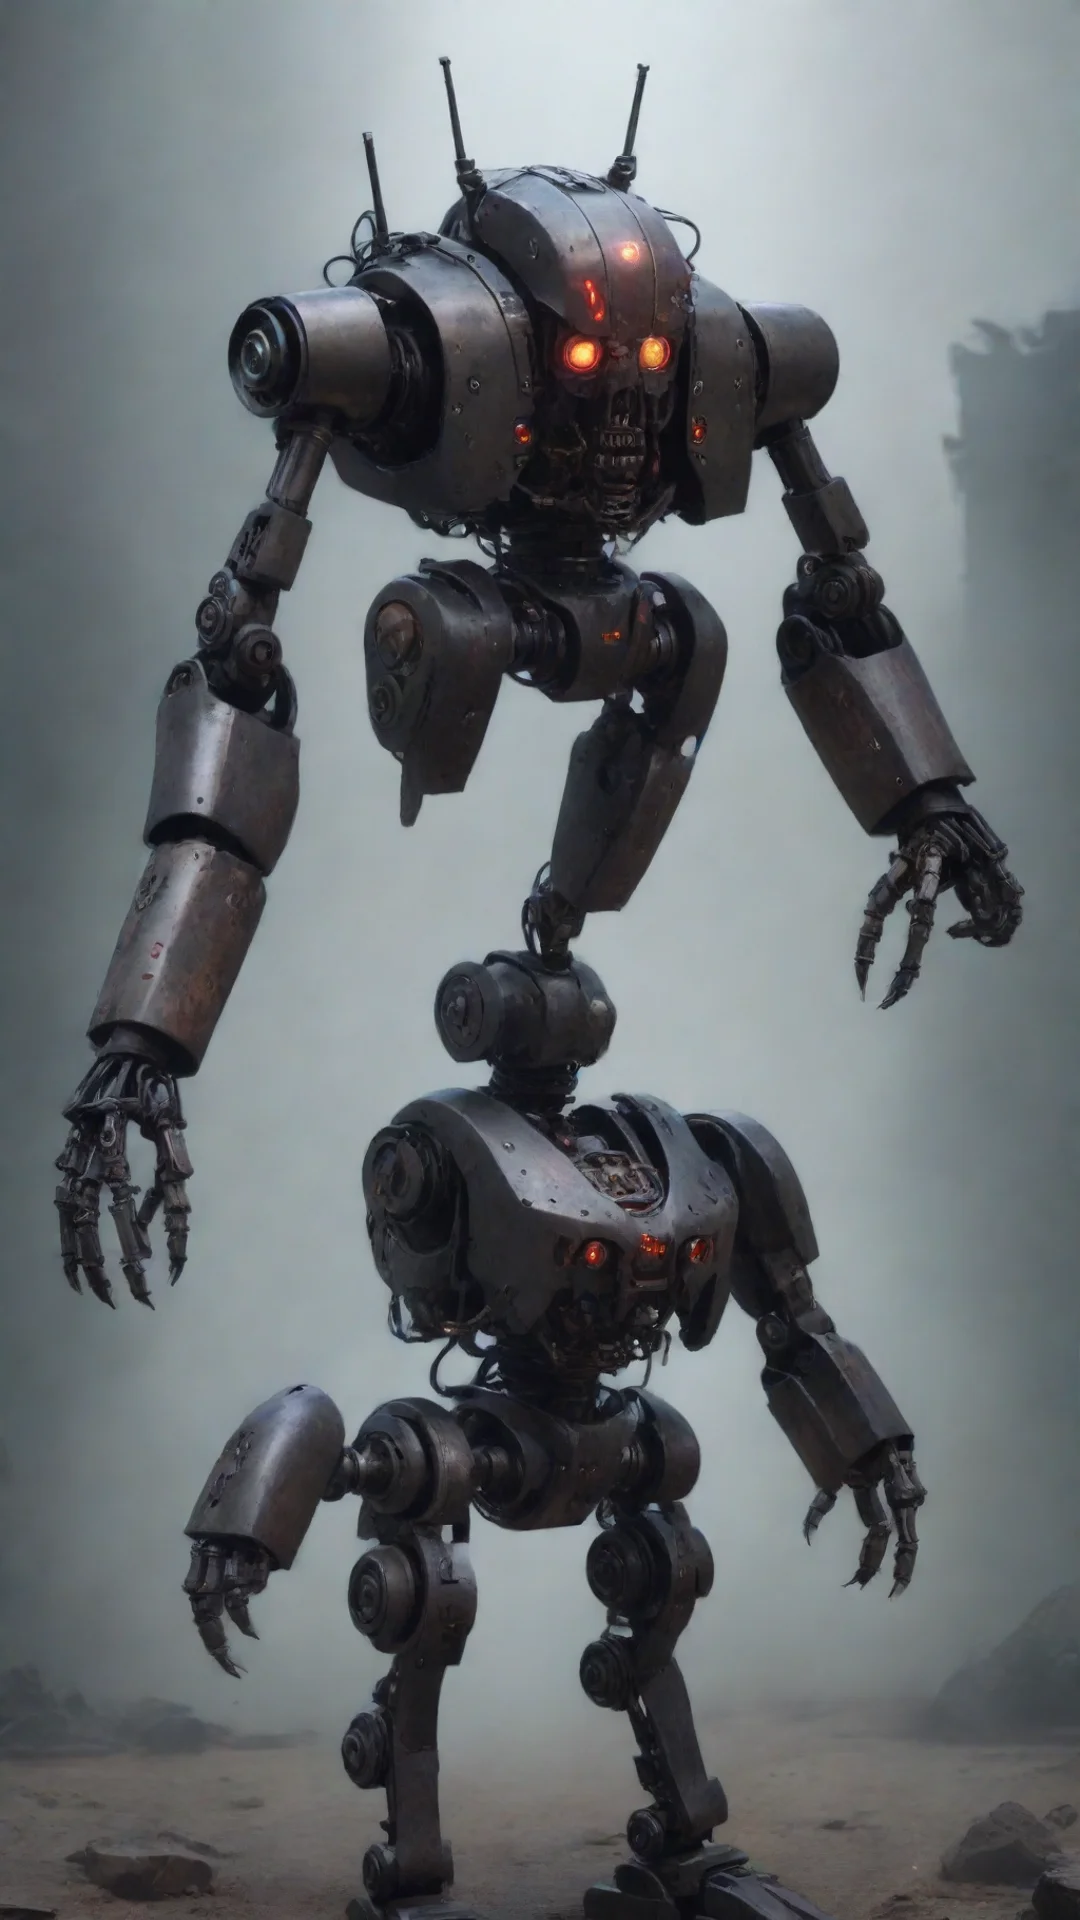 aiamazing grimdark evil ai overlord robot awesome portrait 2 tall